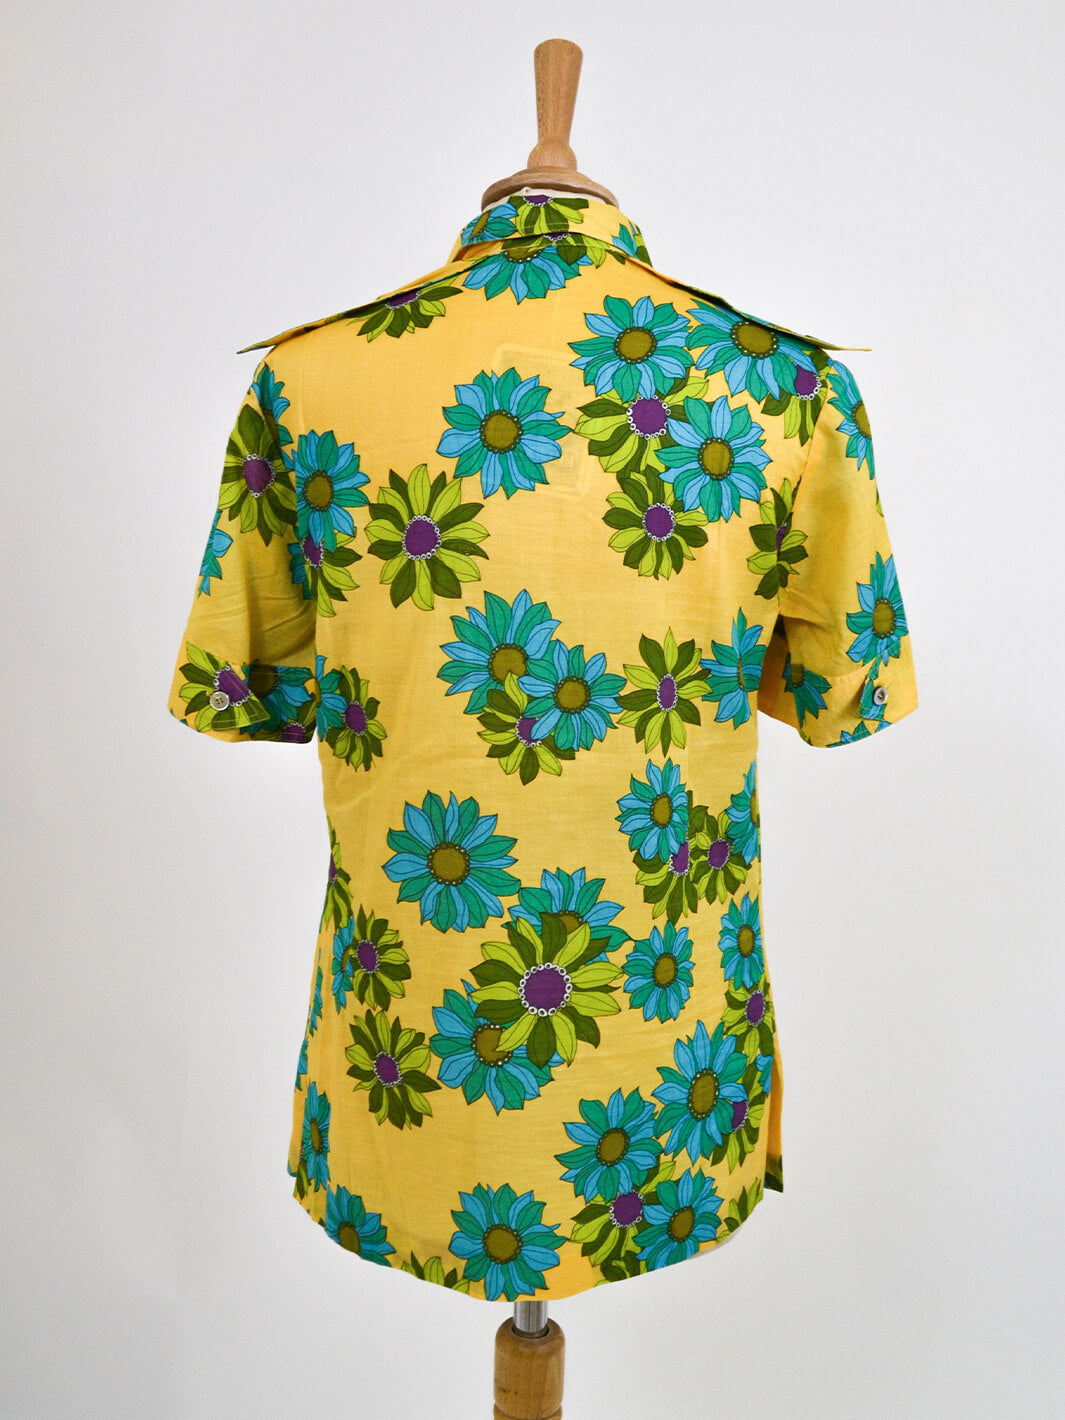 Gio Caré yellow flowered shirt with three-button closure, 70s